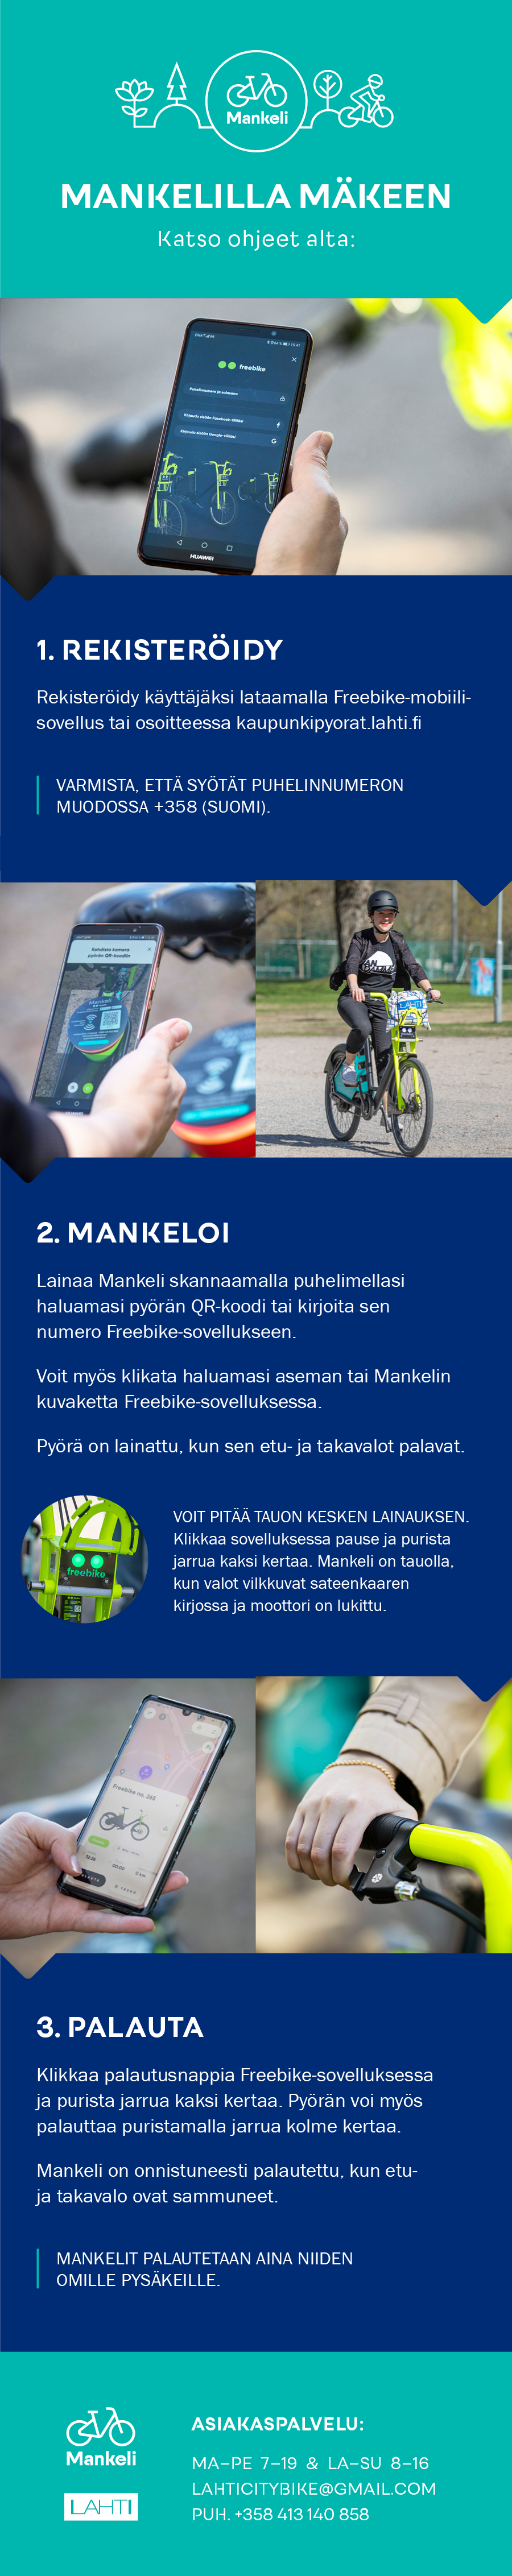 Mankeli_How to pic._FIN_900px